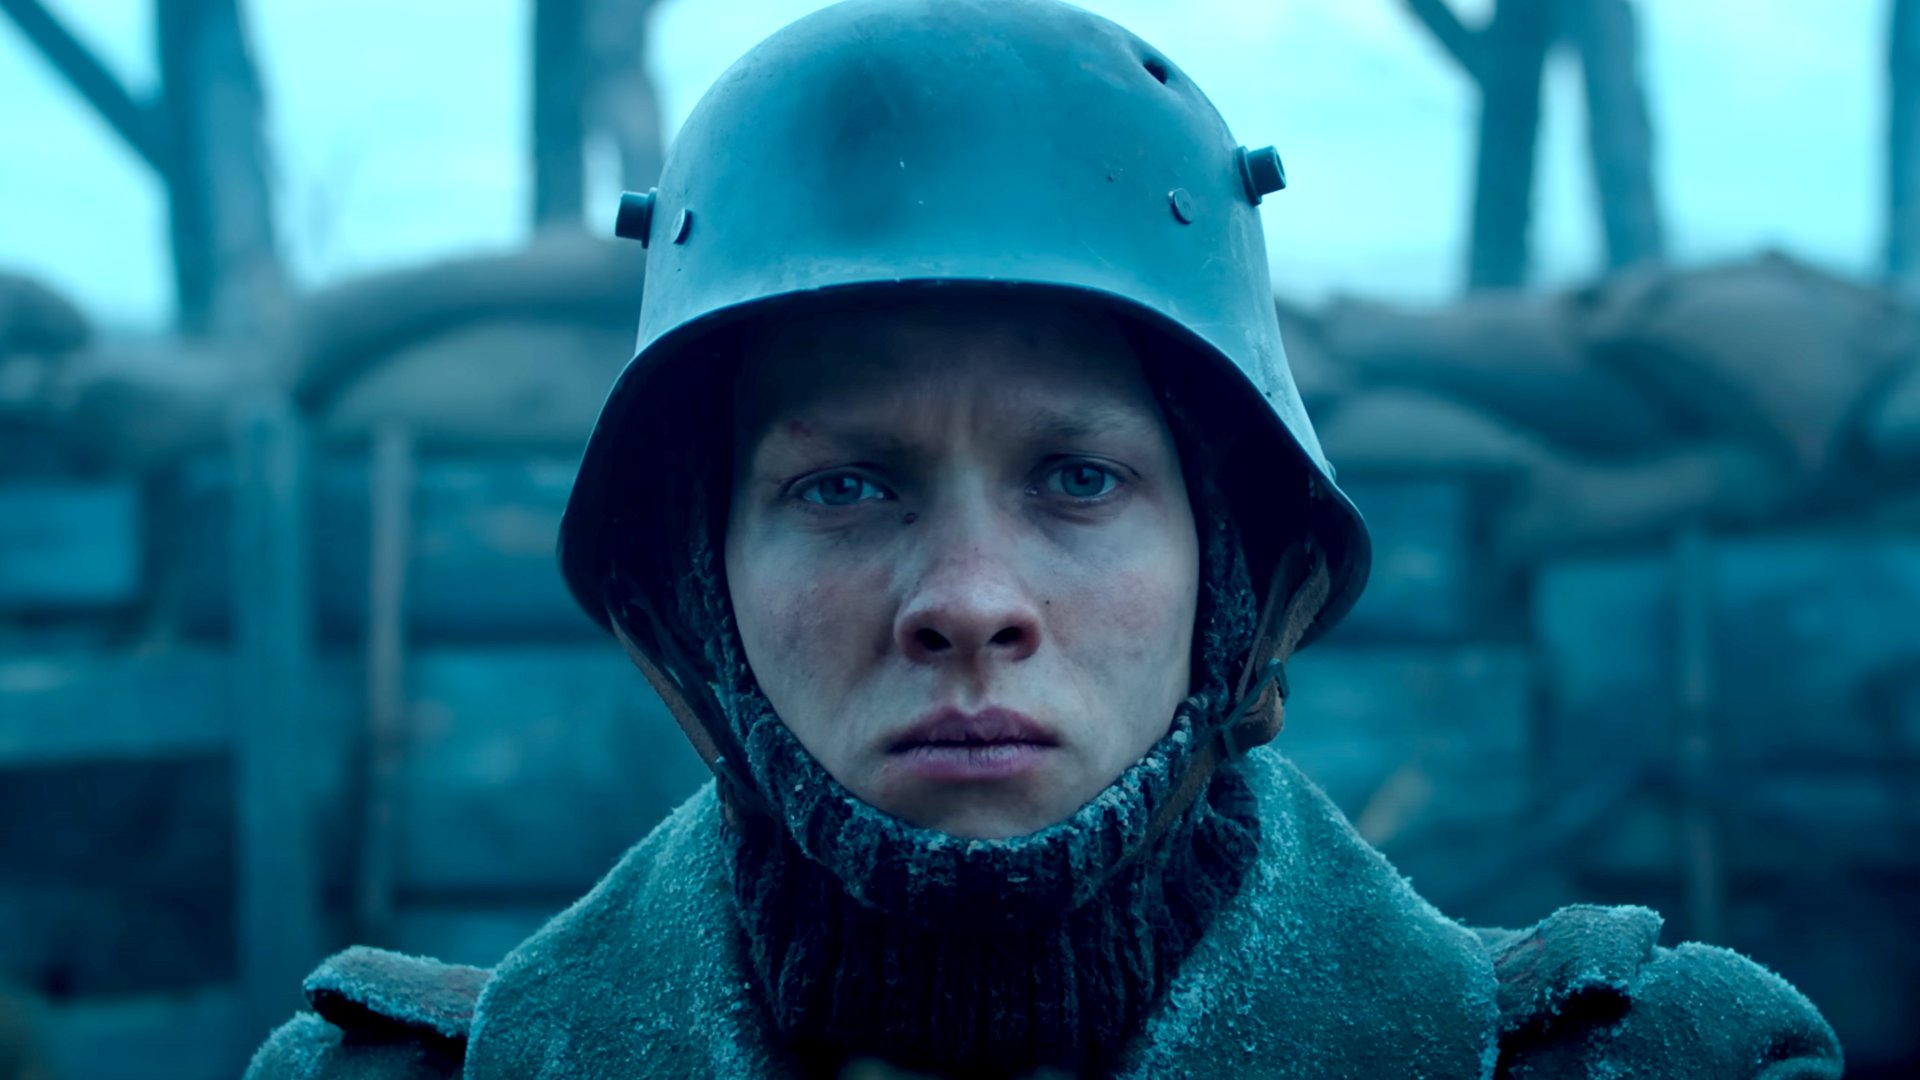 A new trailer for Netflix's All Quiet On The Western Front reveals Erich Maria Remarque's brutal war story is finally being told the way the wounded WWI veteran intended.